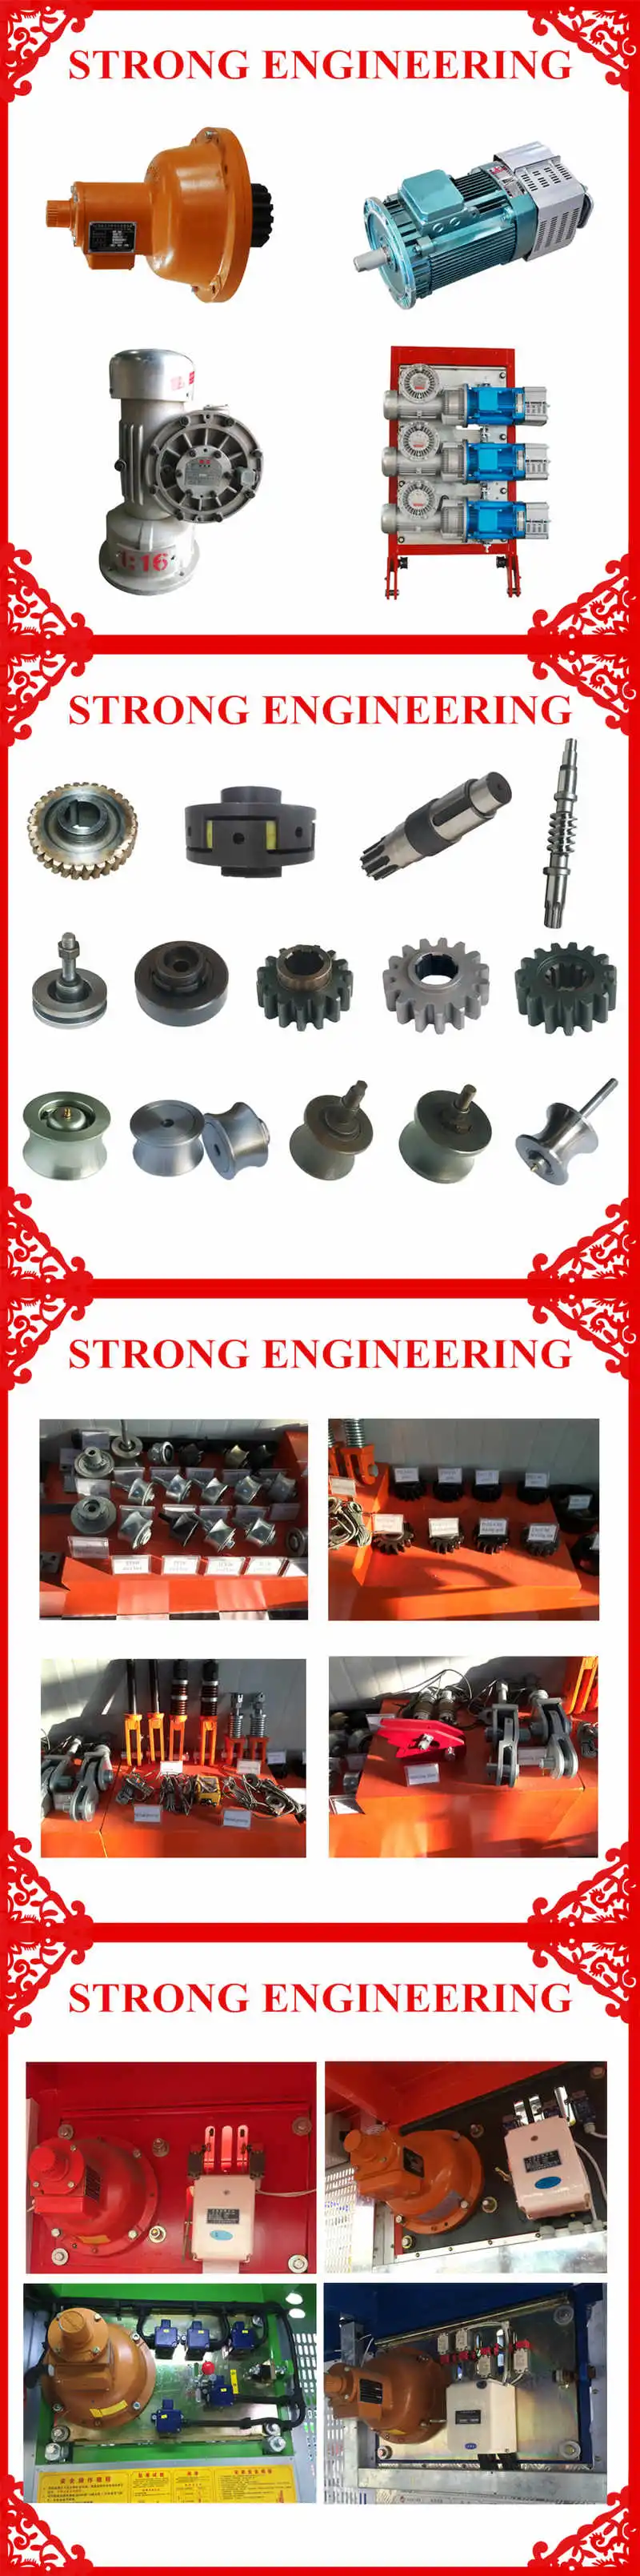 China Supplier Professional Smooth Helical Bevel Geared Speed Motor Worm Gear Gearbox Reducer 11kw 15kw 18kw